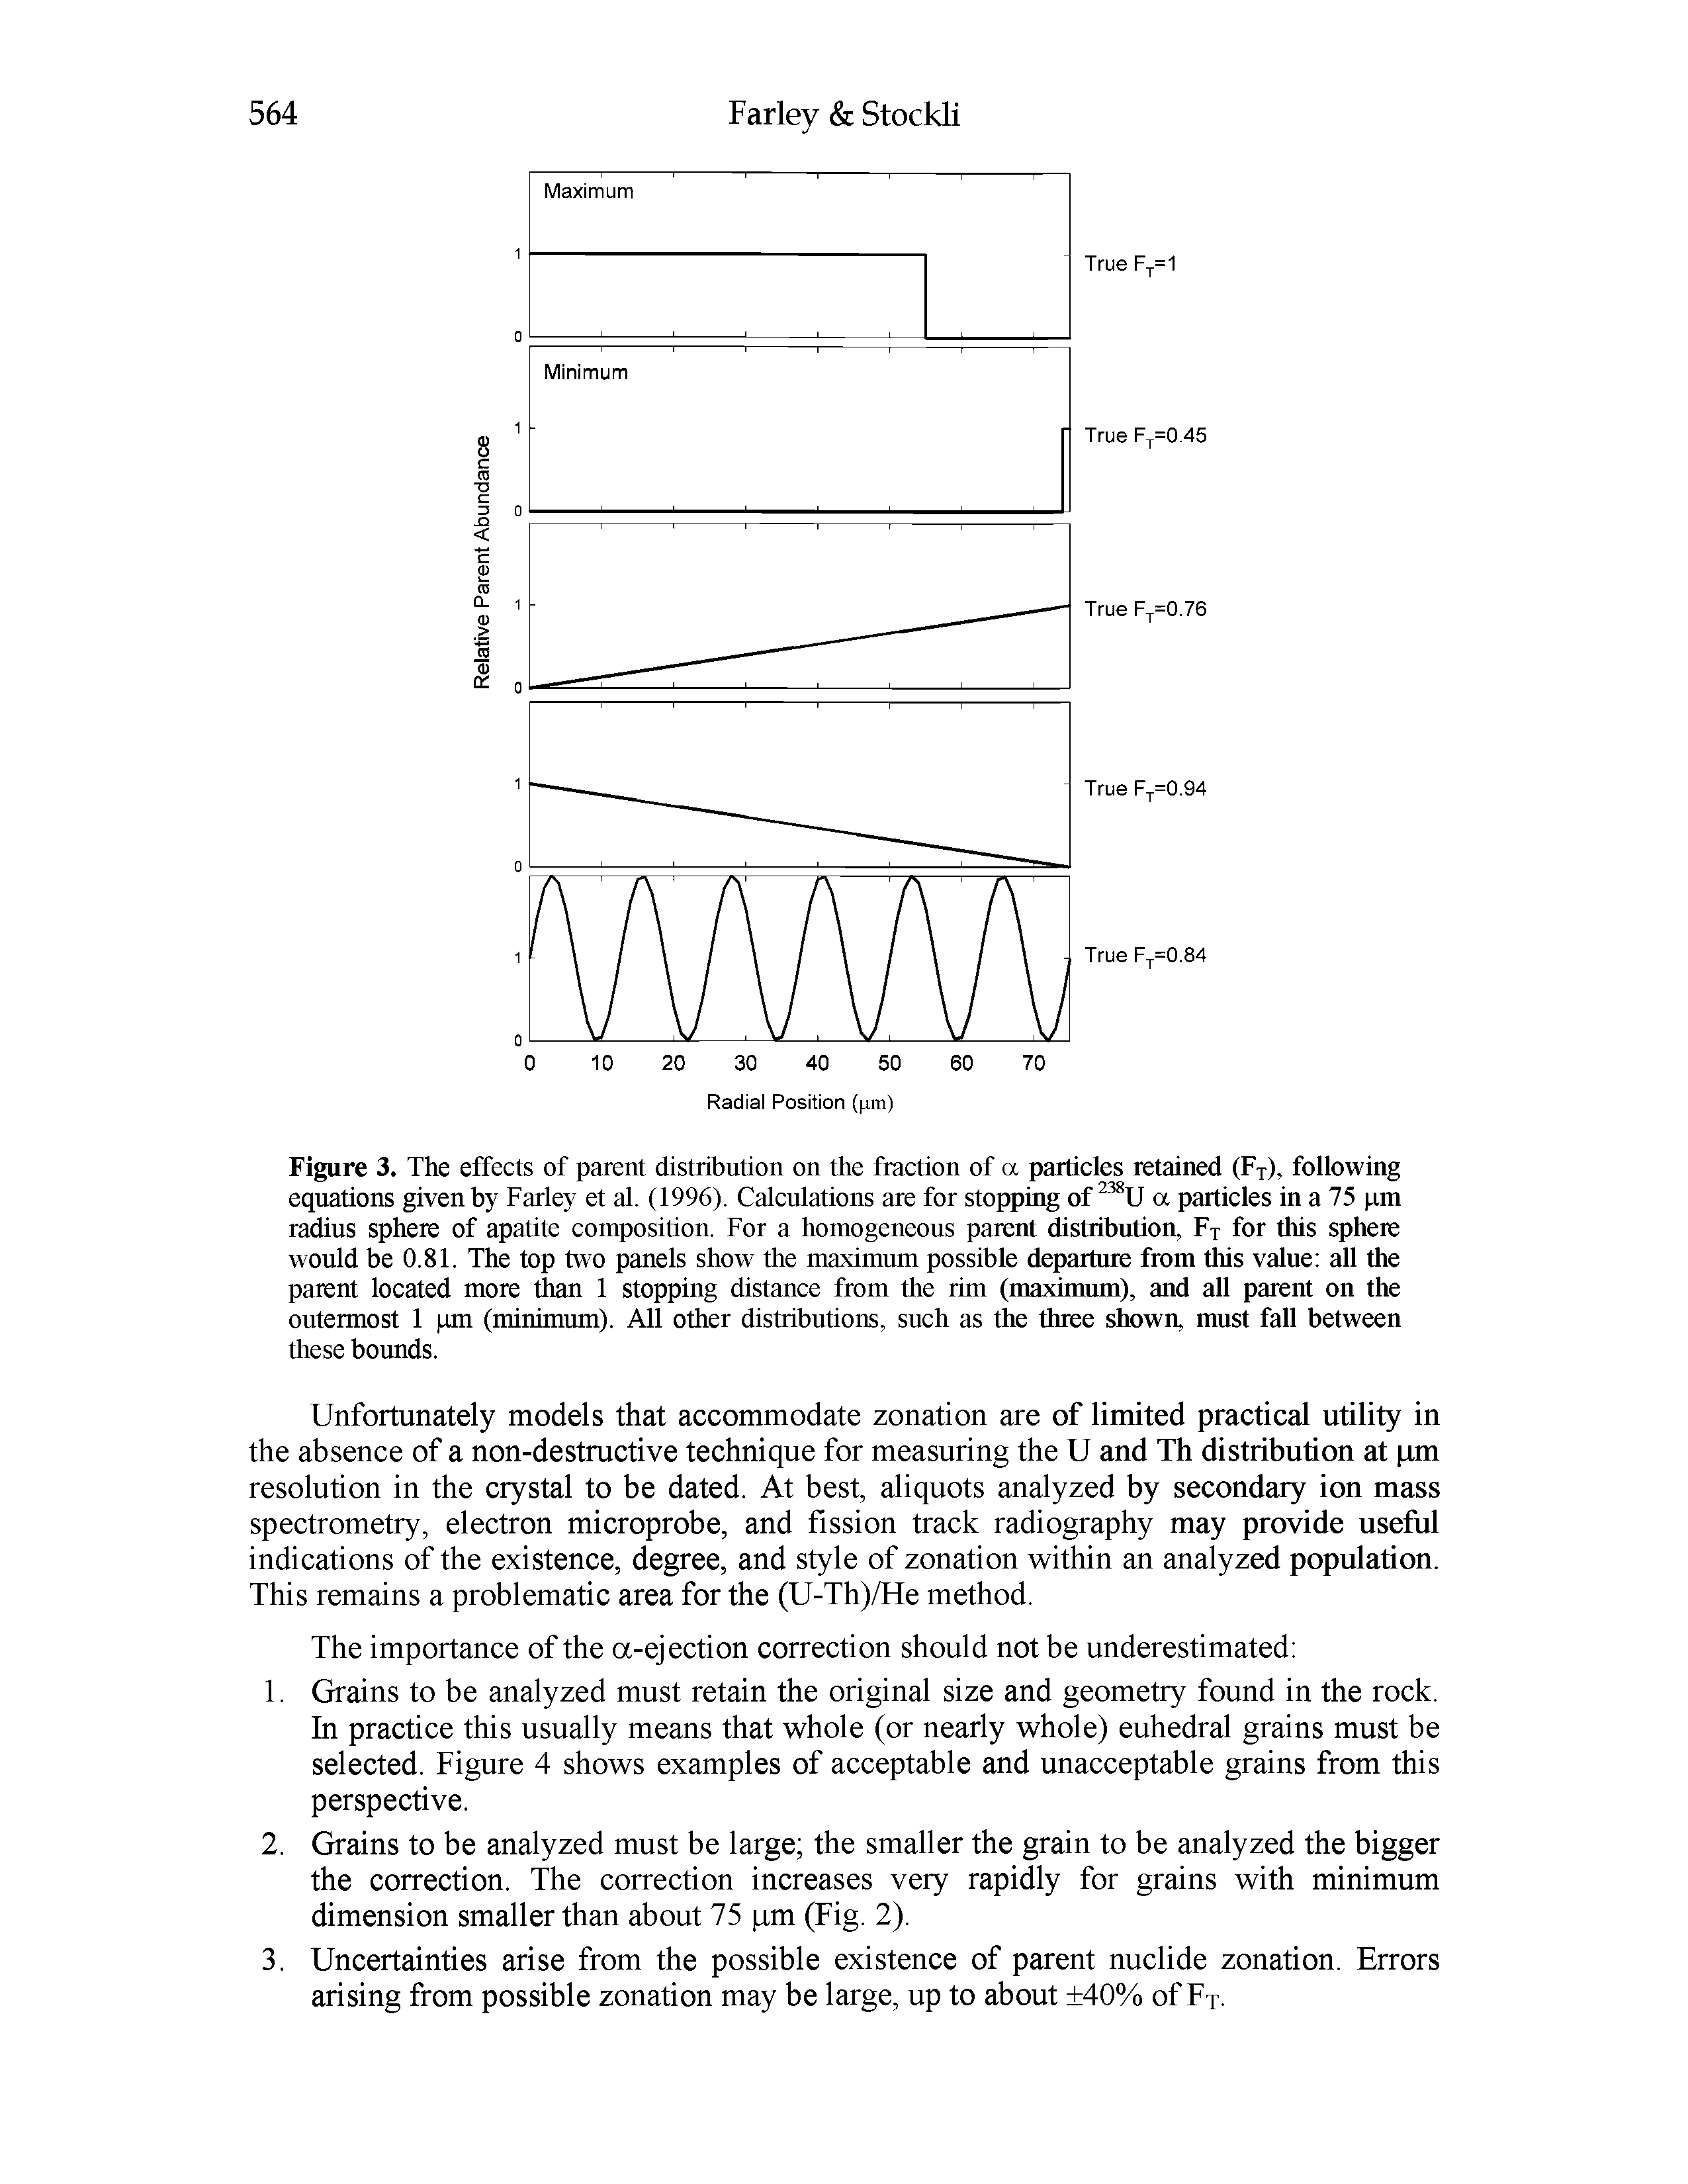 Figure 3. The effects of parent distribution on the fraction of a particles retained (Fj), following equations given by Farley et al. (1996). Calculations are for stopping of a particles in a 75 pm radius sphere of apatite composition. For a homogeneous parent distribution, Ft for this sphere would be 0.81. The top two panels show the maximum possible departure from this value all the parent located more than 1 stopping distance from the rim (maximum), and all parent on the outermost 1 pm (miitimum). All other distributions, such as the three shown, must fall between these bounds.